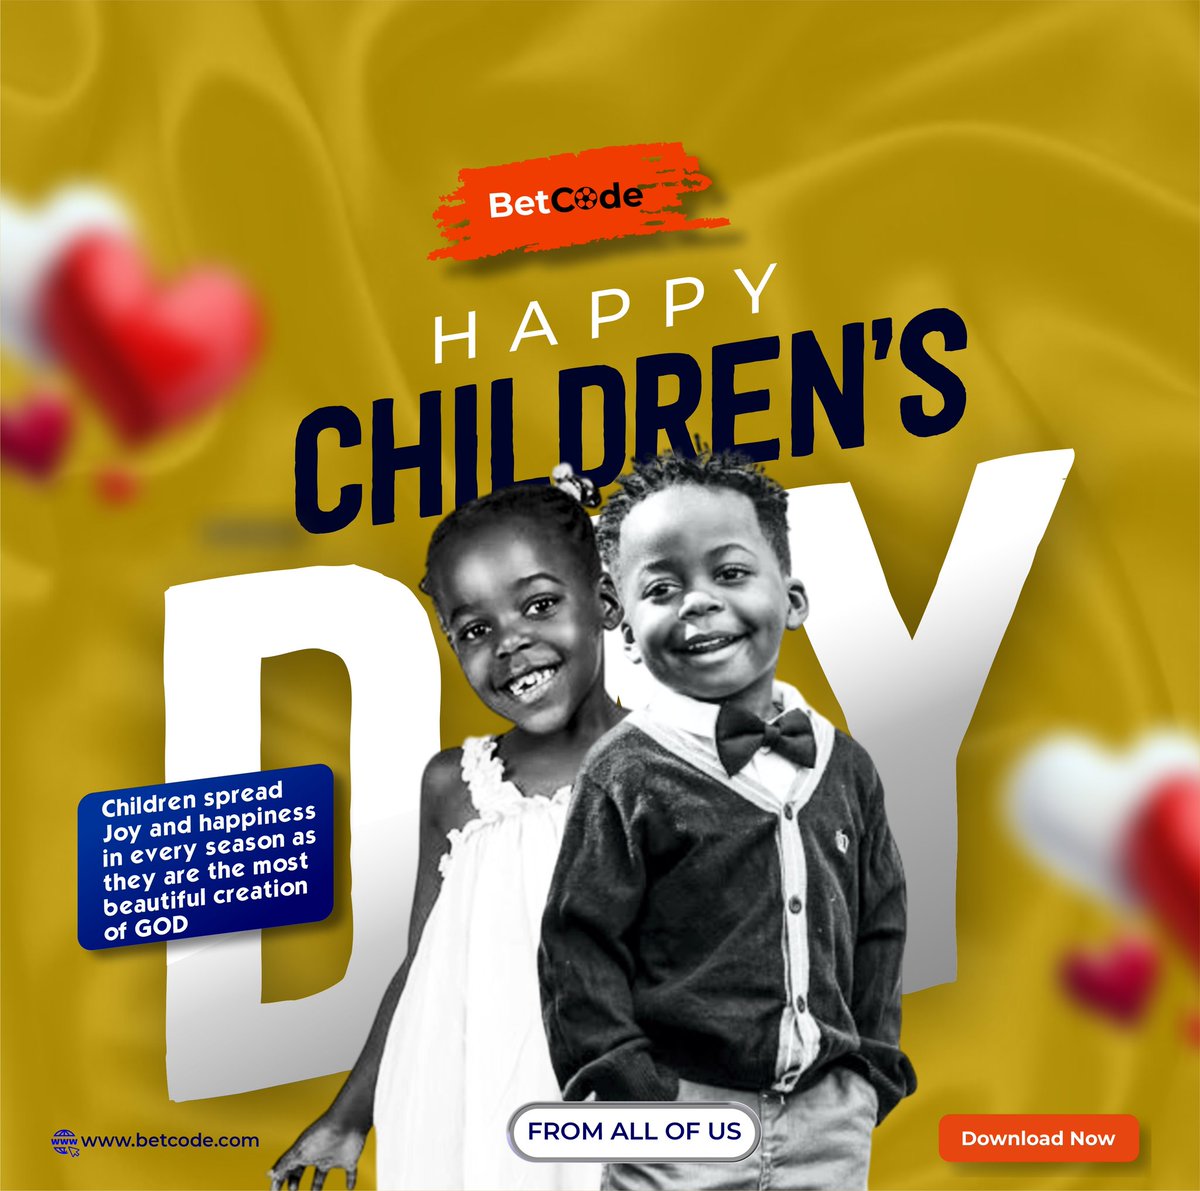 🥳ITS CHILDREN'S DAY GIVEAWAY 🥳 😘To celebrate the joy and innocence of childhood, we’ve not forgotten the children using betcode, although the age is 18 and above, 🥳So drop your DETAILS, let’s start sharing the 💕 😘 Let's make this Children's Day unforgettable! 🌟